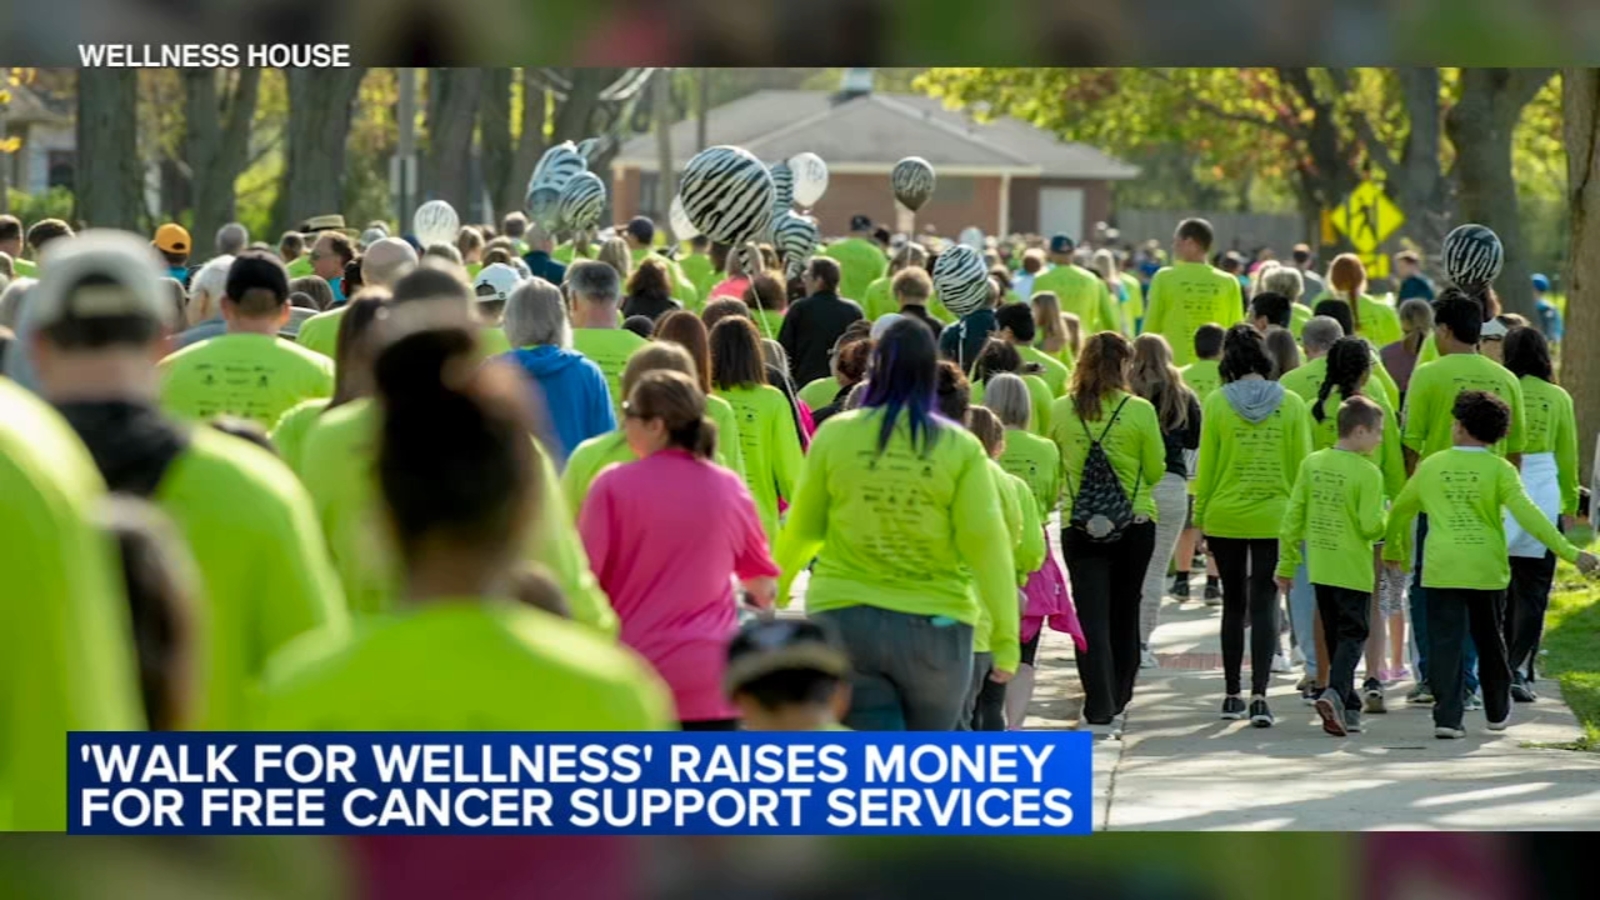 Wellness House to host Walk for Wellness House in Hinsdale to raise funds for free cancer support services for families [Video]